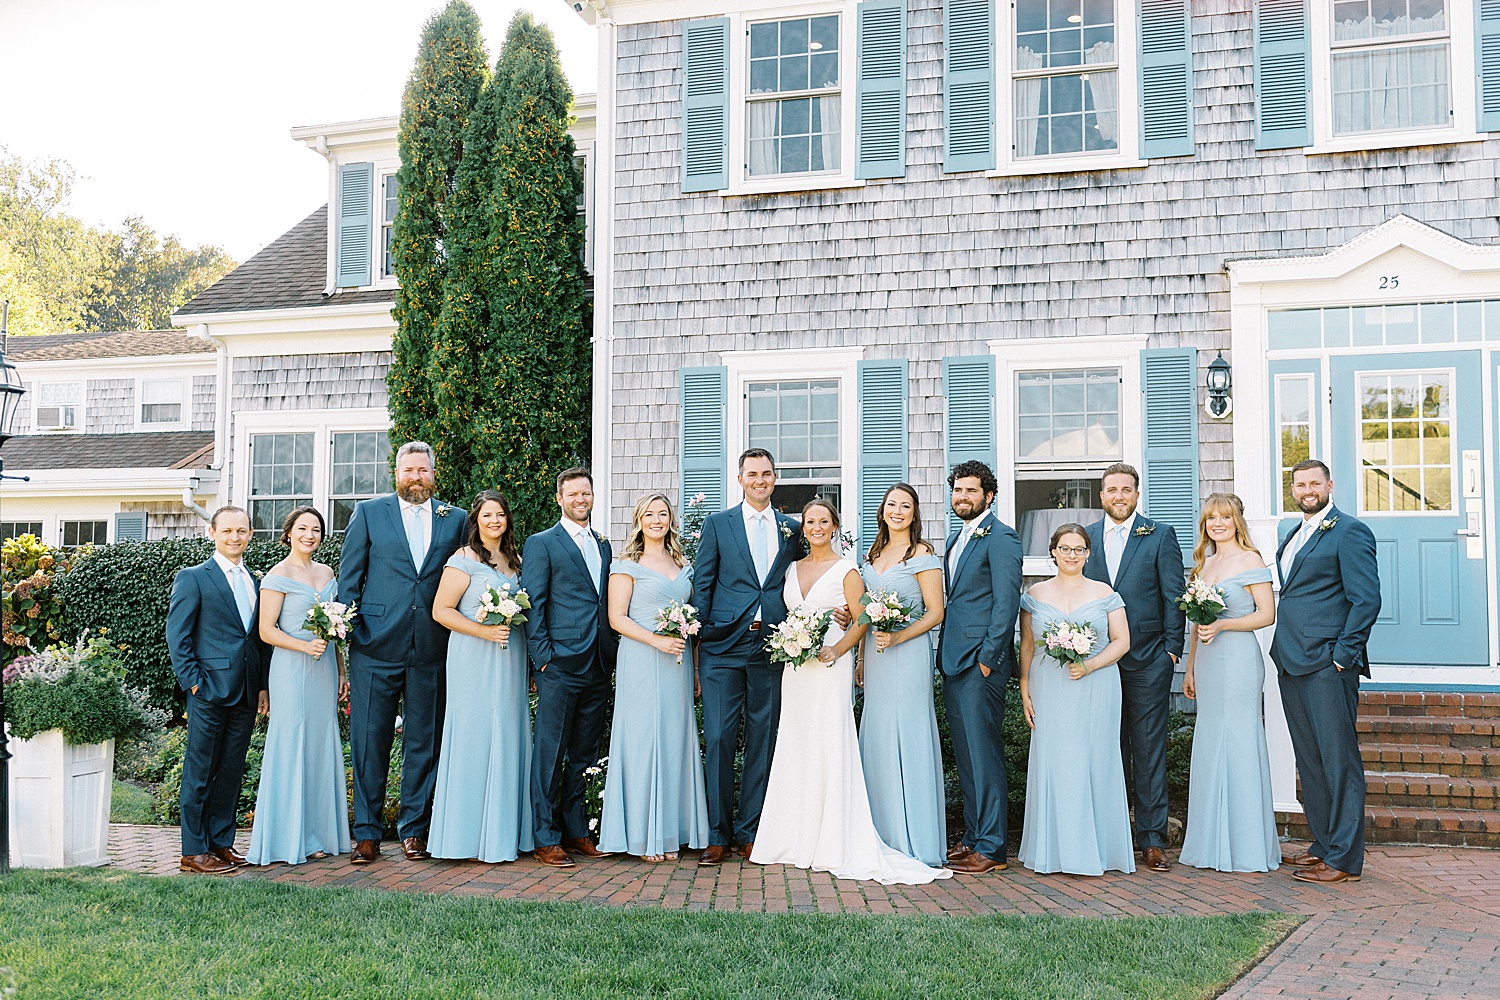 Wedding party in pale blue by Cape Cod wedding photographer Lynne Reznick